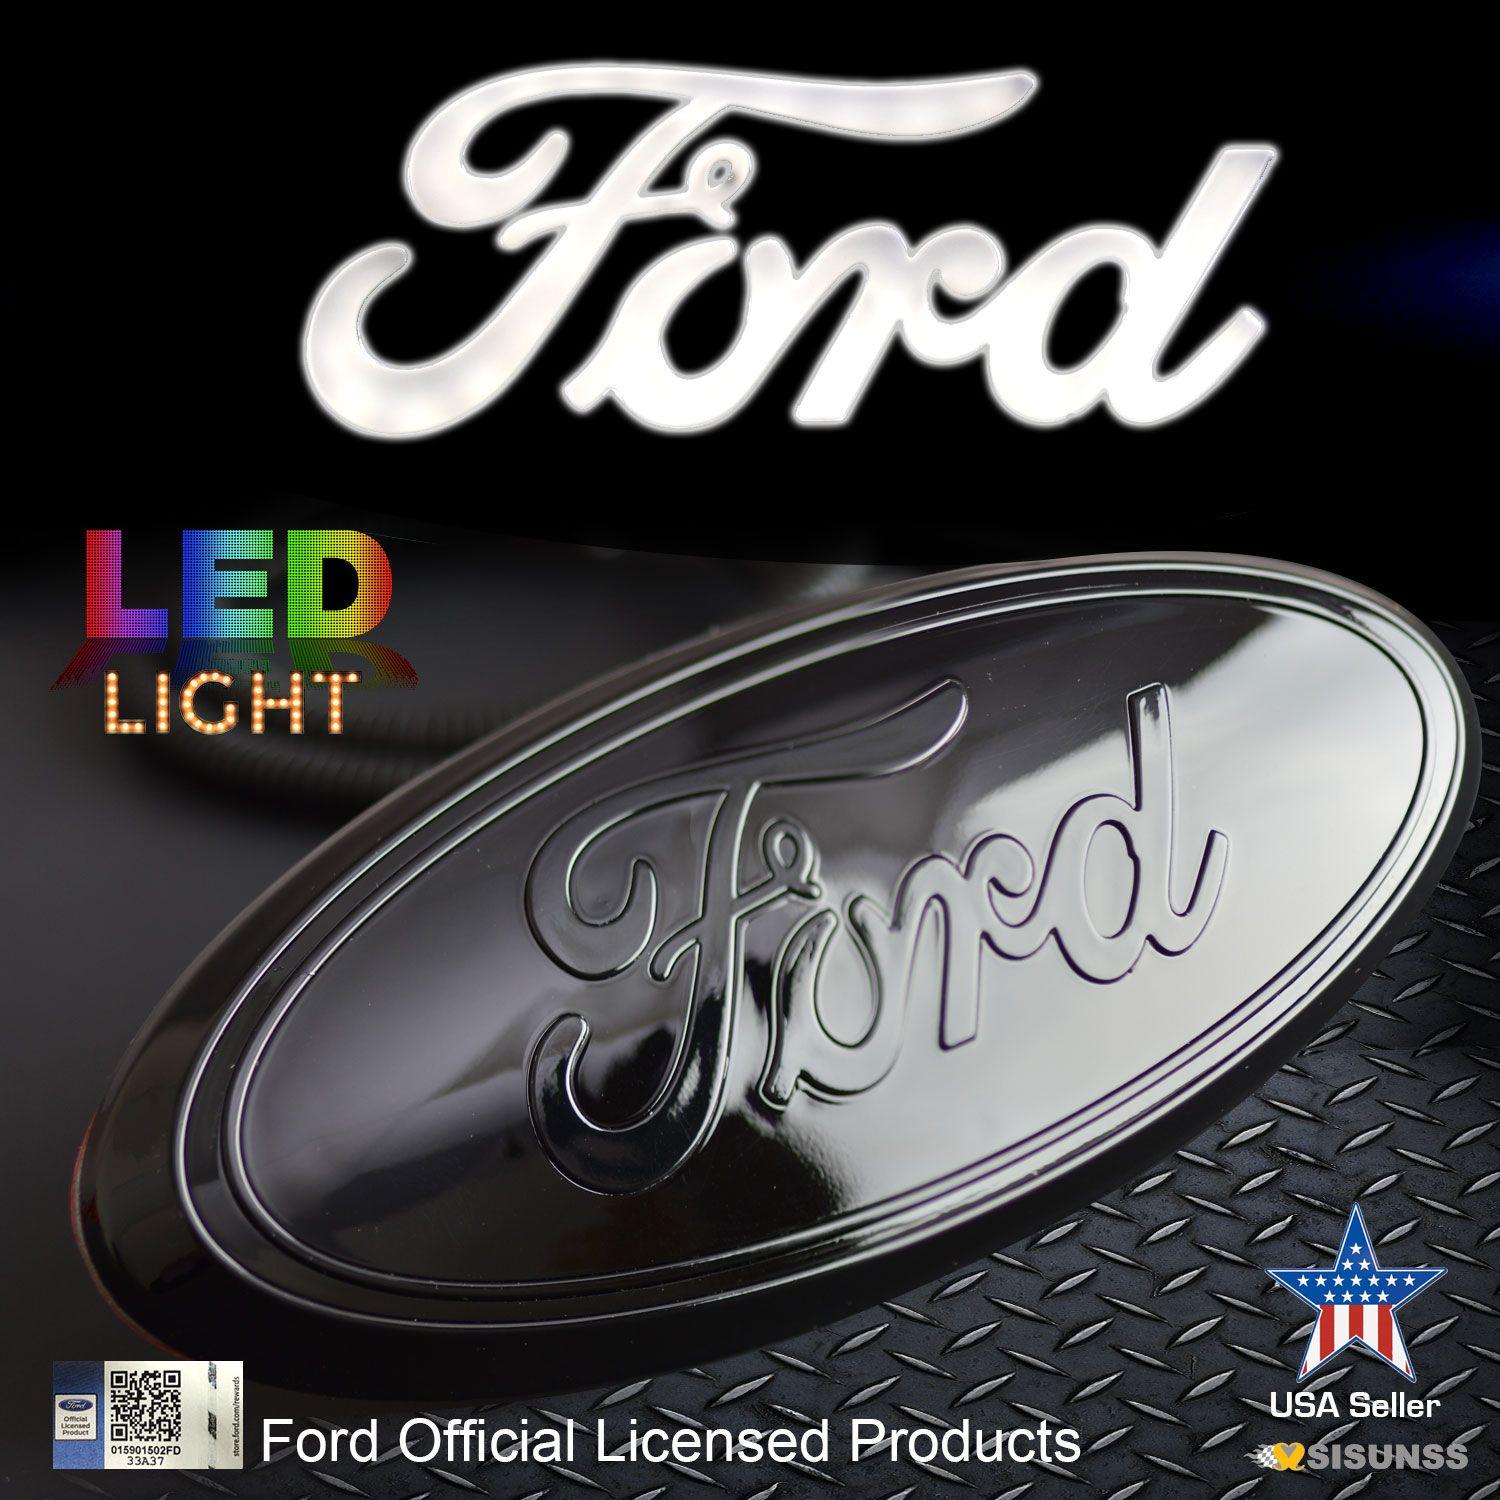 2018 Ford Logo - Ford grill emblem 9” 2016-2018 Explorer 2004-2014 F150 Front grill Badge  FORD LOGO Black – LED Lighted GM Certified Product